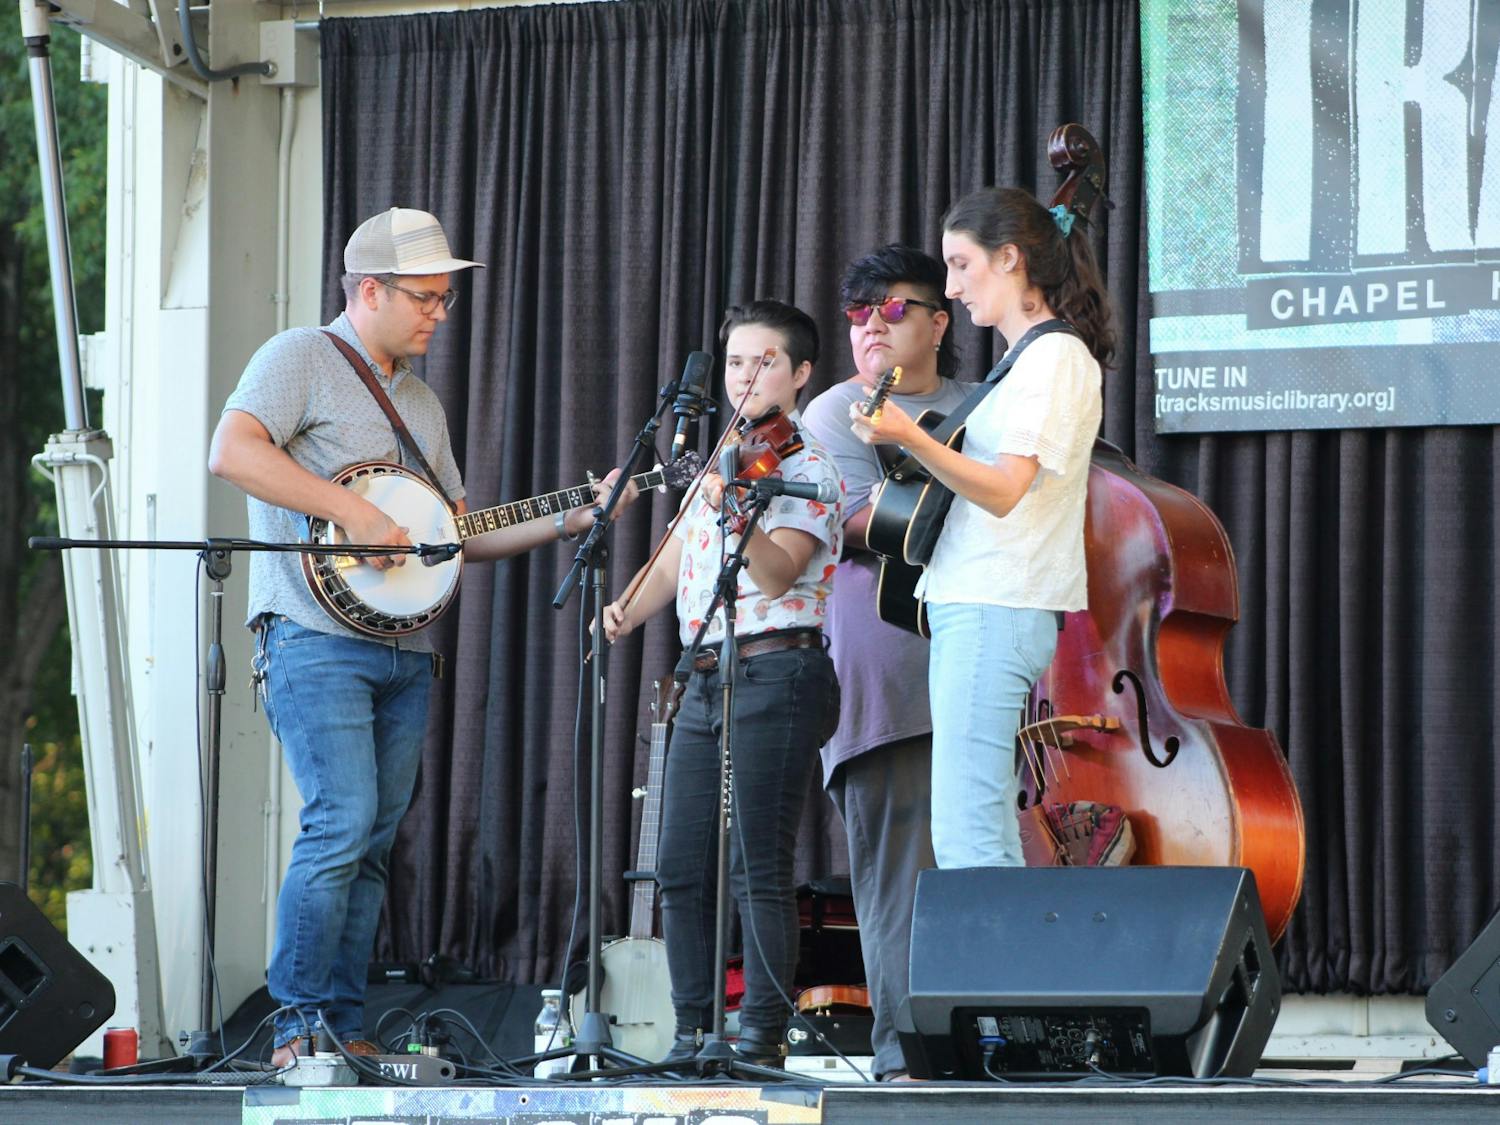 The bluegrass band Hard Drive performs at the Tracks Music Series concert on September 9th, 2021. The Tracks Music Series is a free event that takes place every Thursday evening during September at University Place and features local Chapel Hill musicians.